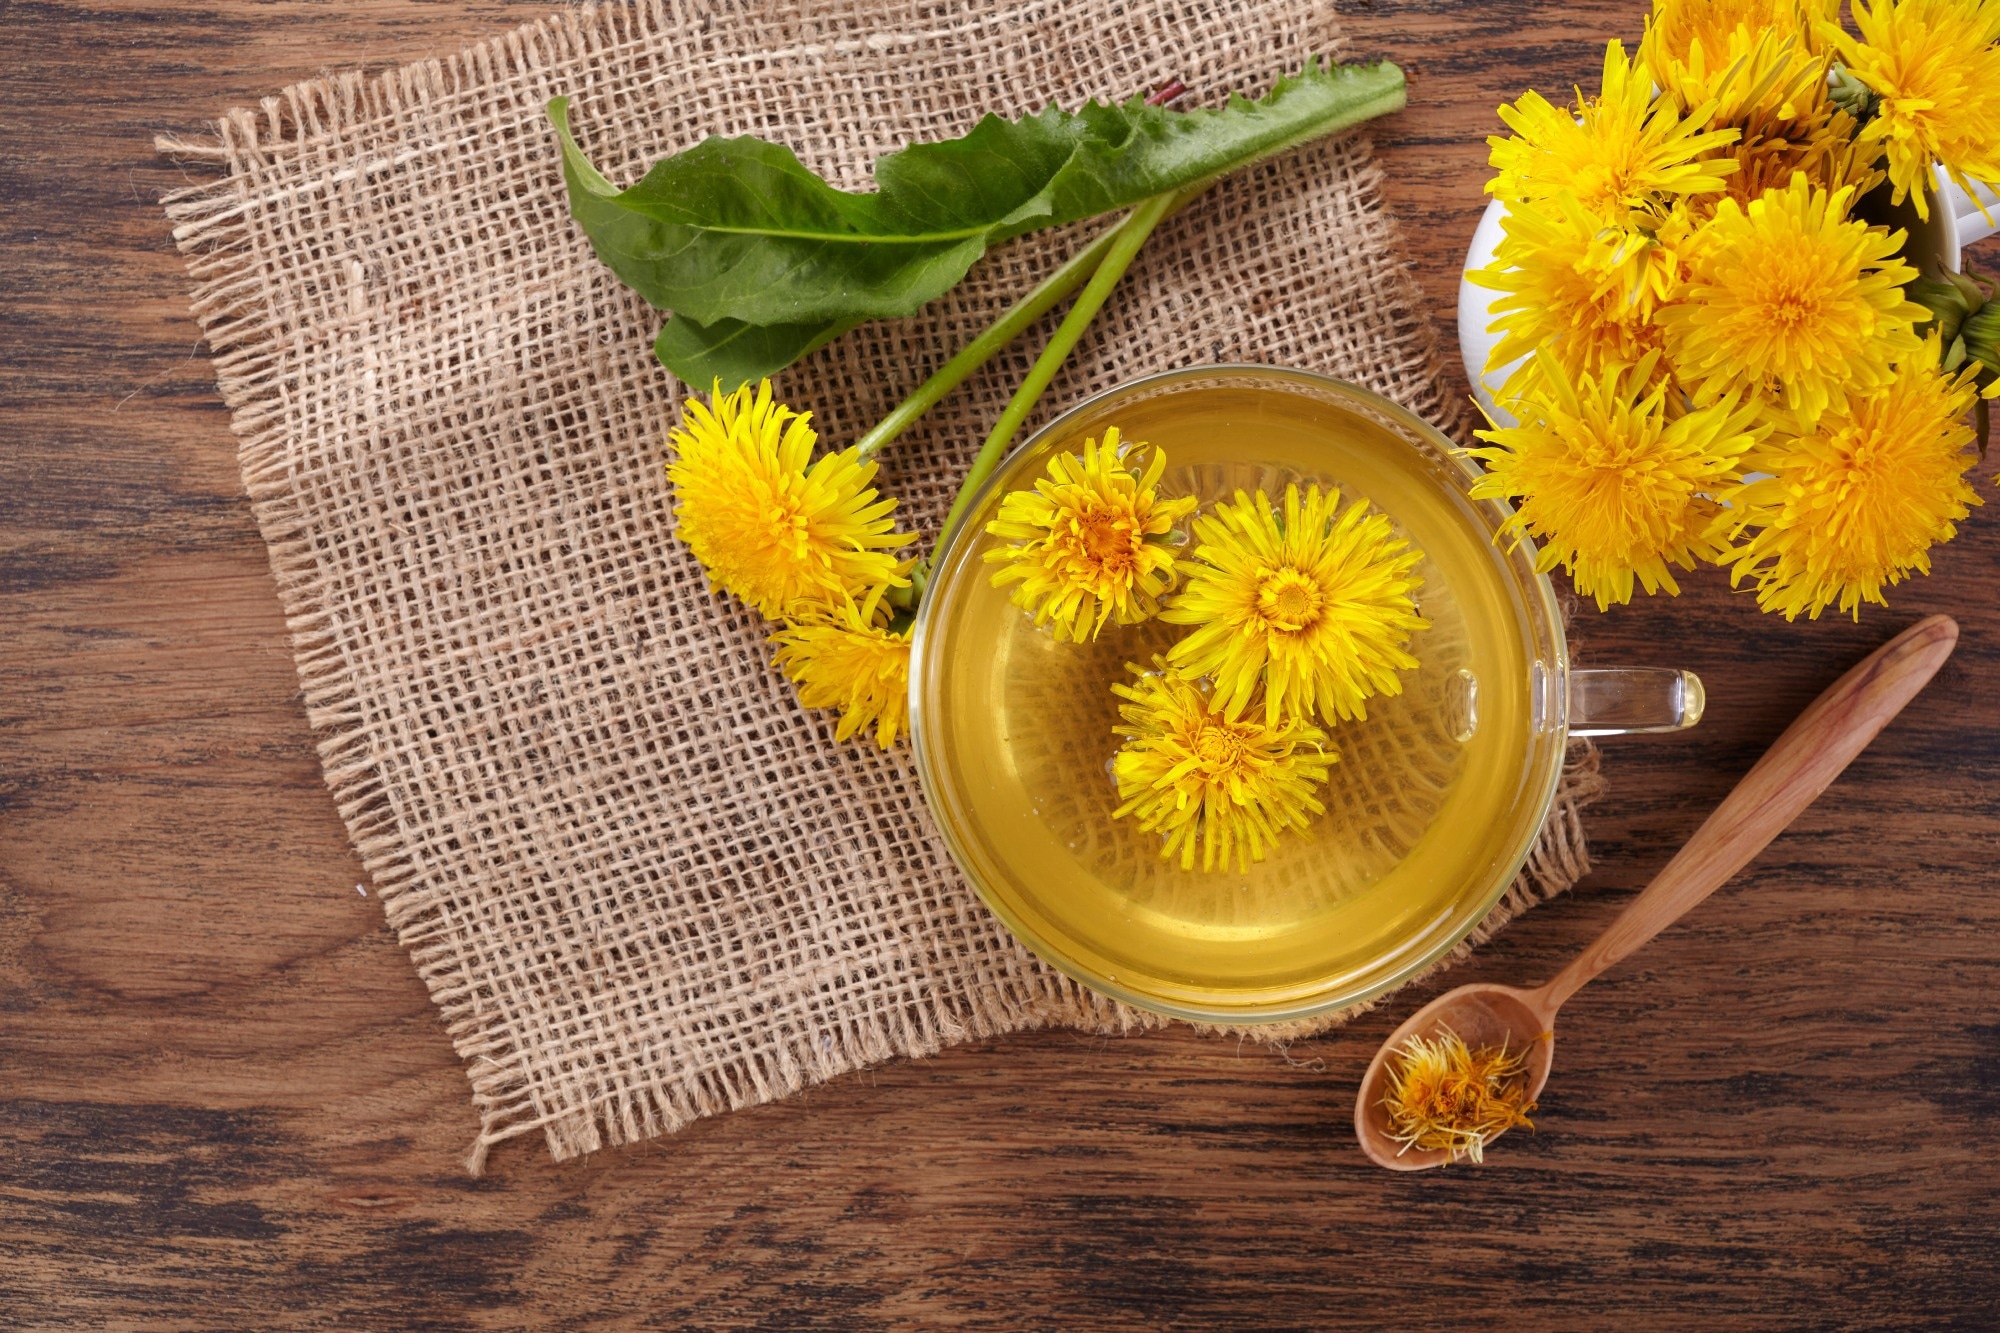 Combined dandelion extract and all-trans retinoic acid induces cytotoxicity in human breast cancer cells